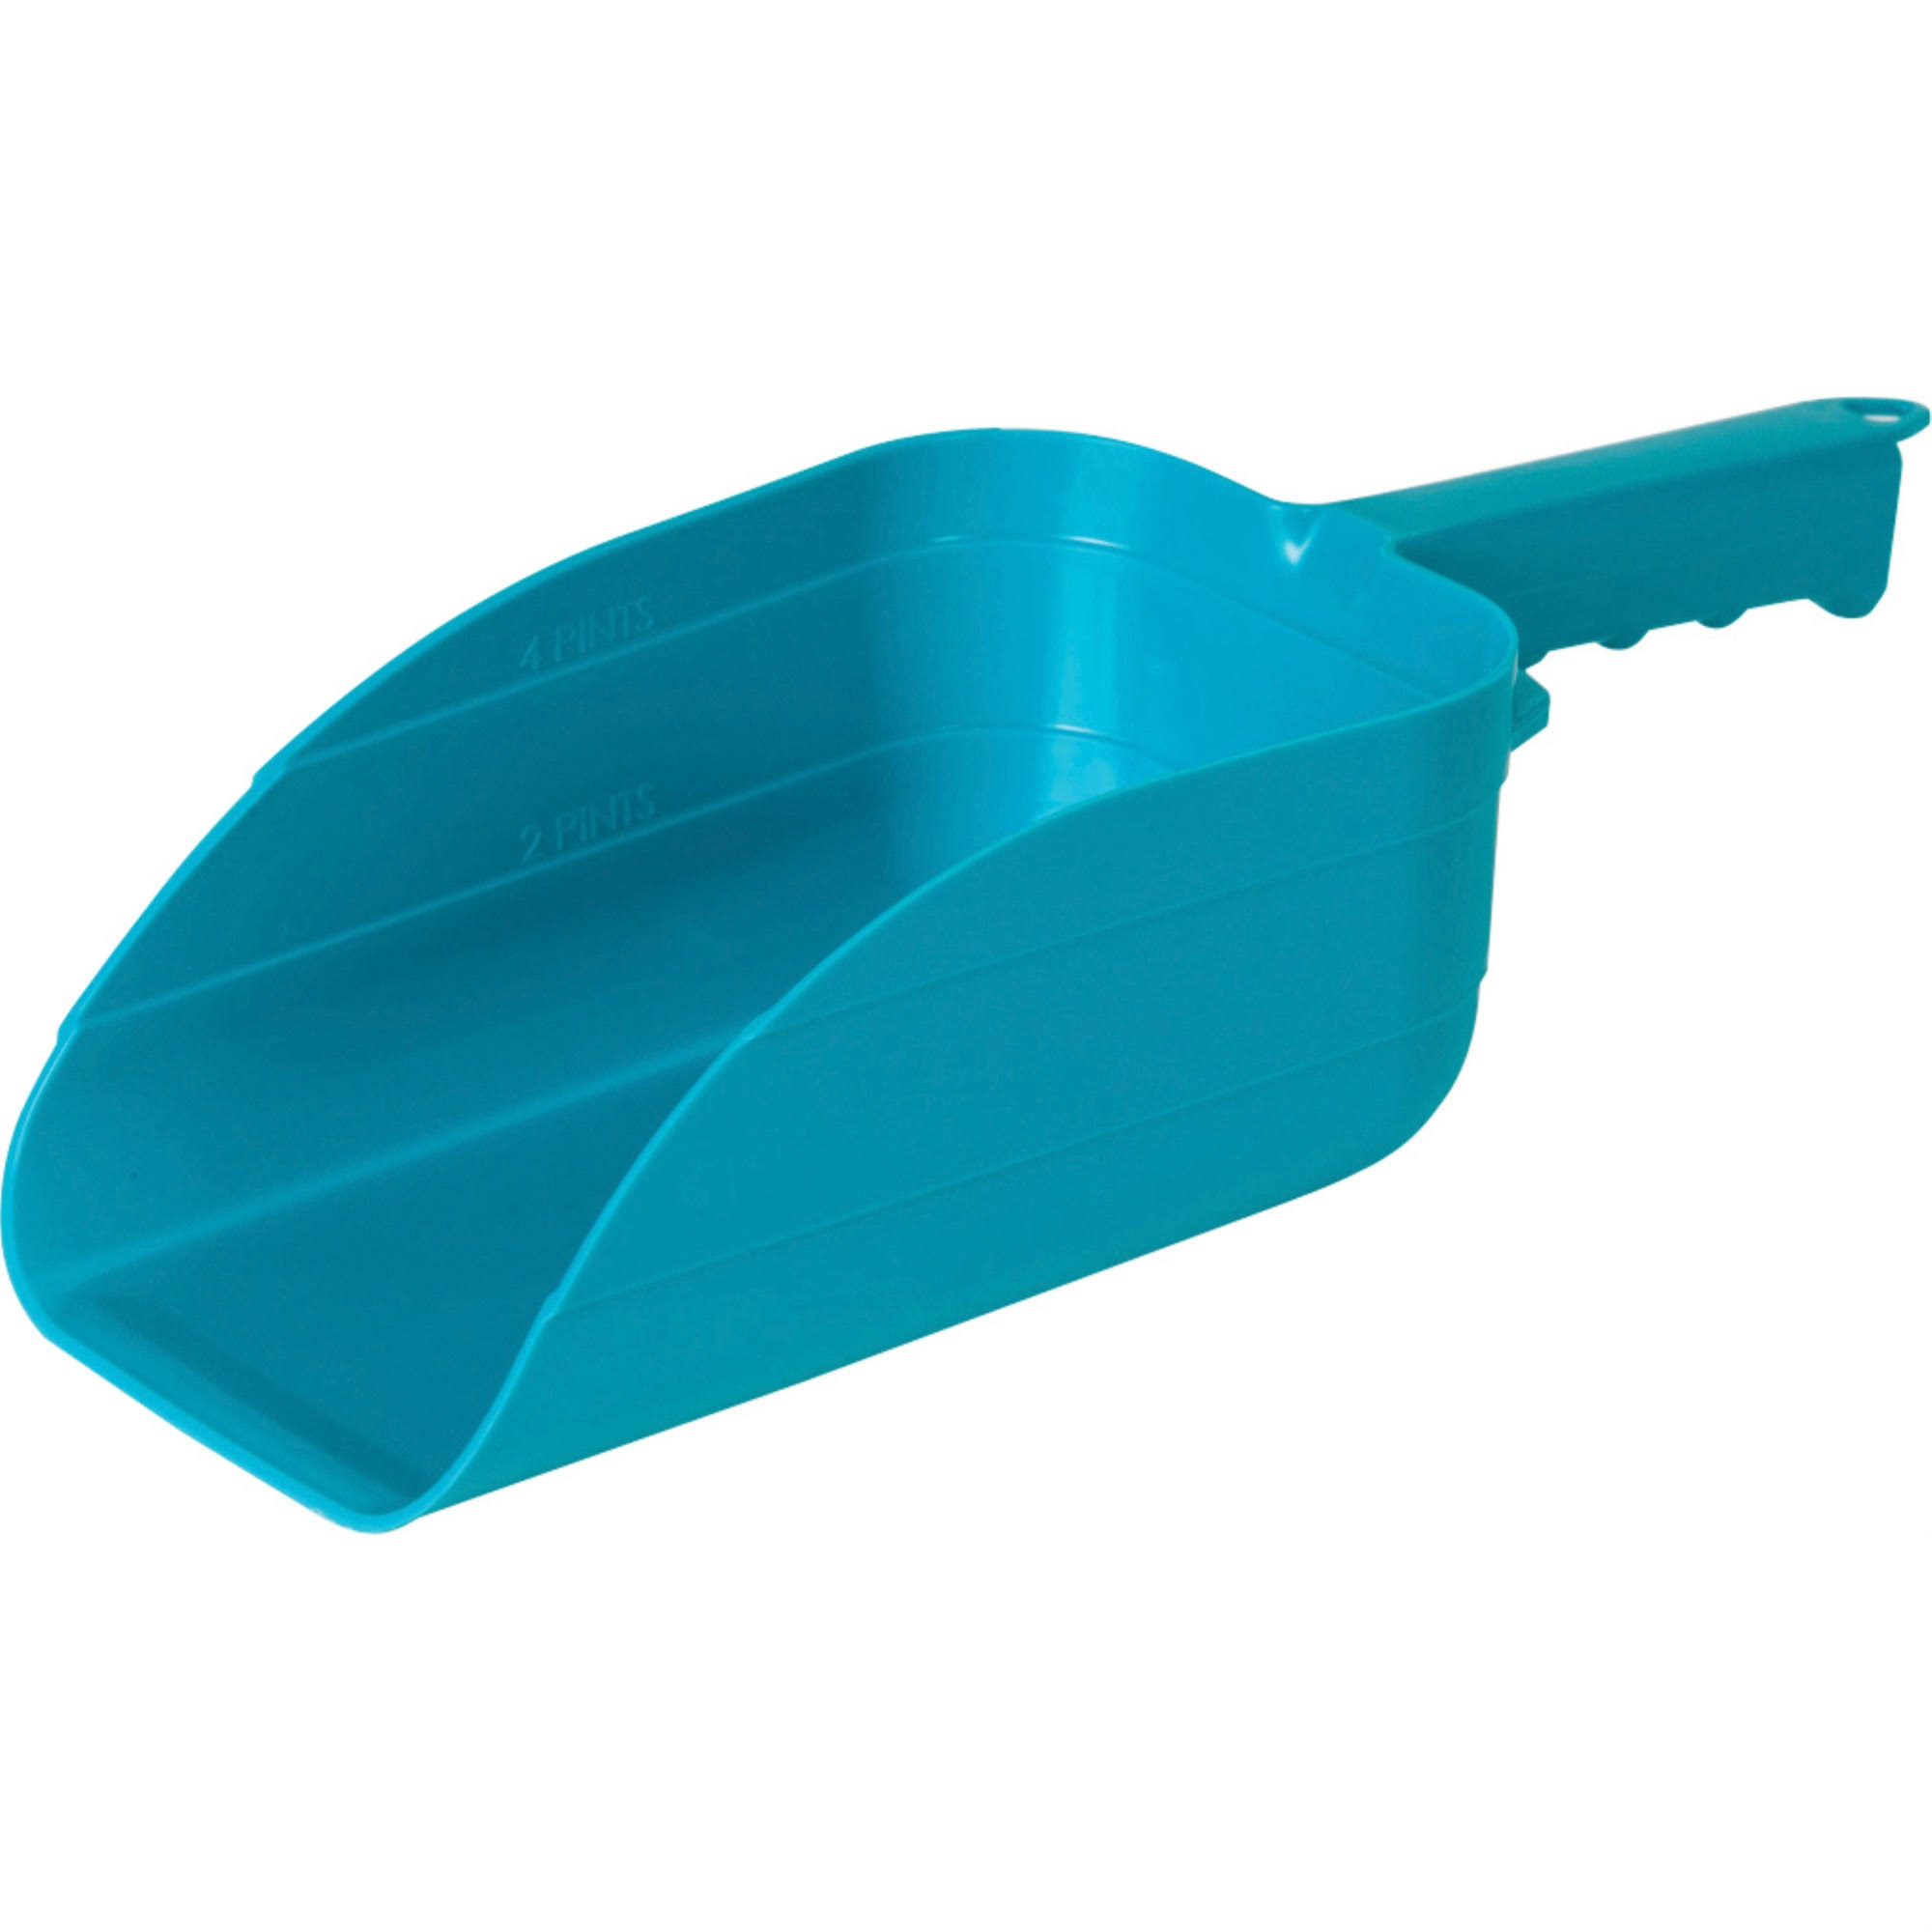 Miller Feed Scoop Teal 5 Pint - 90/19012 | Horses | Best Price Guarantee | Delivery guaranteed | 30 Day Money Back Guarantee